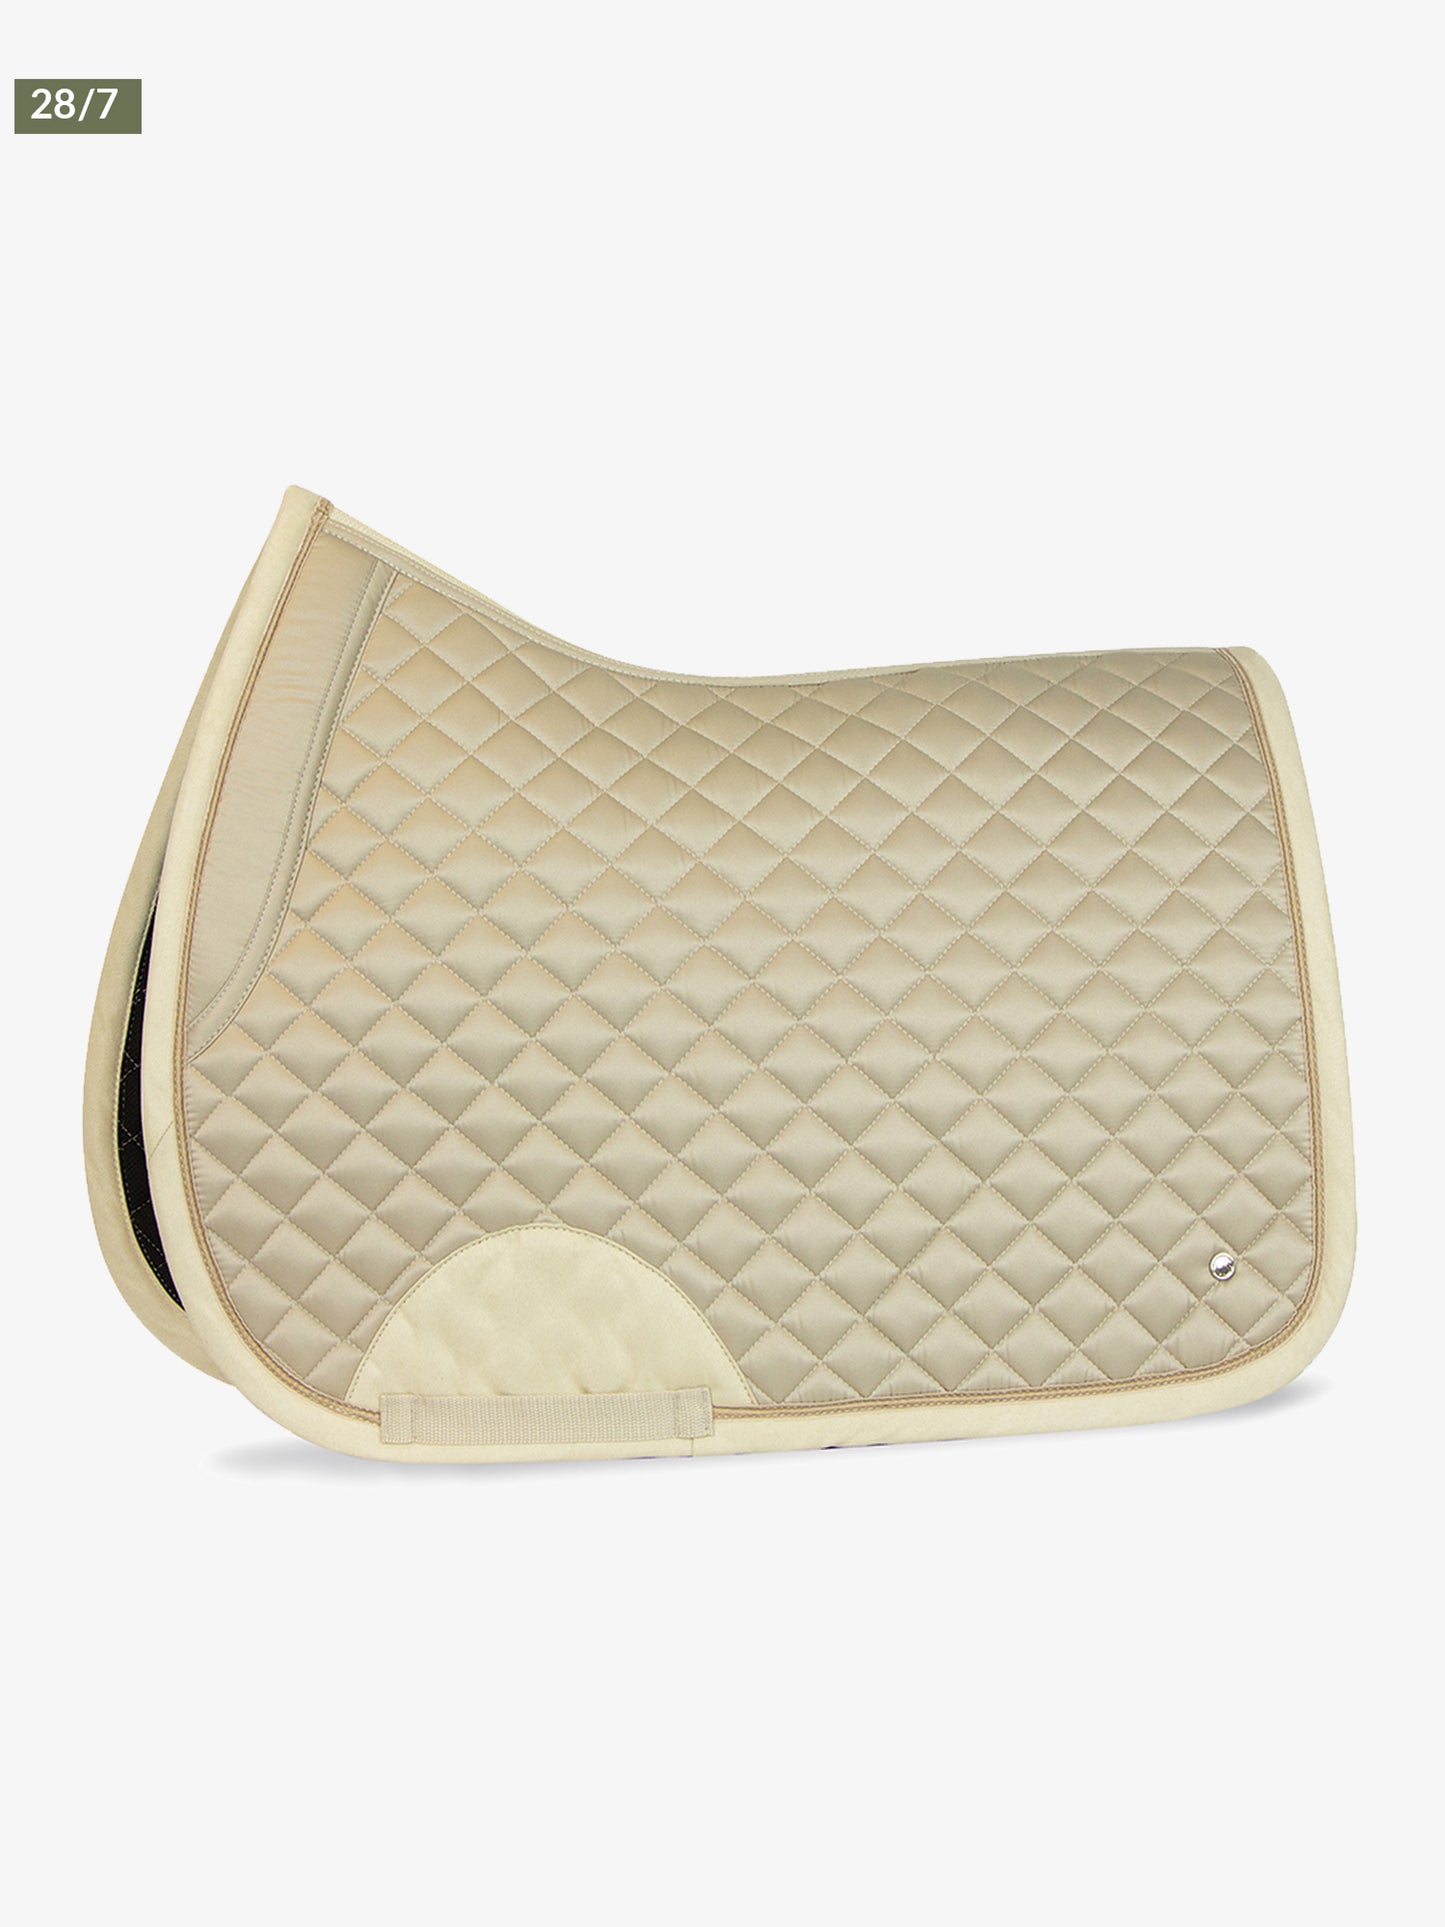 PS of Sweden Limited Summer | Pole Jump Saddle Pad | Navy or Sand